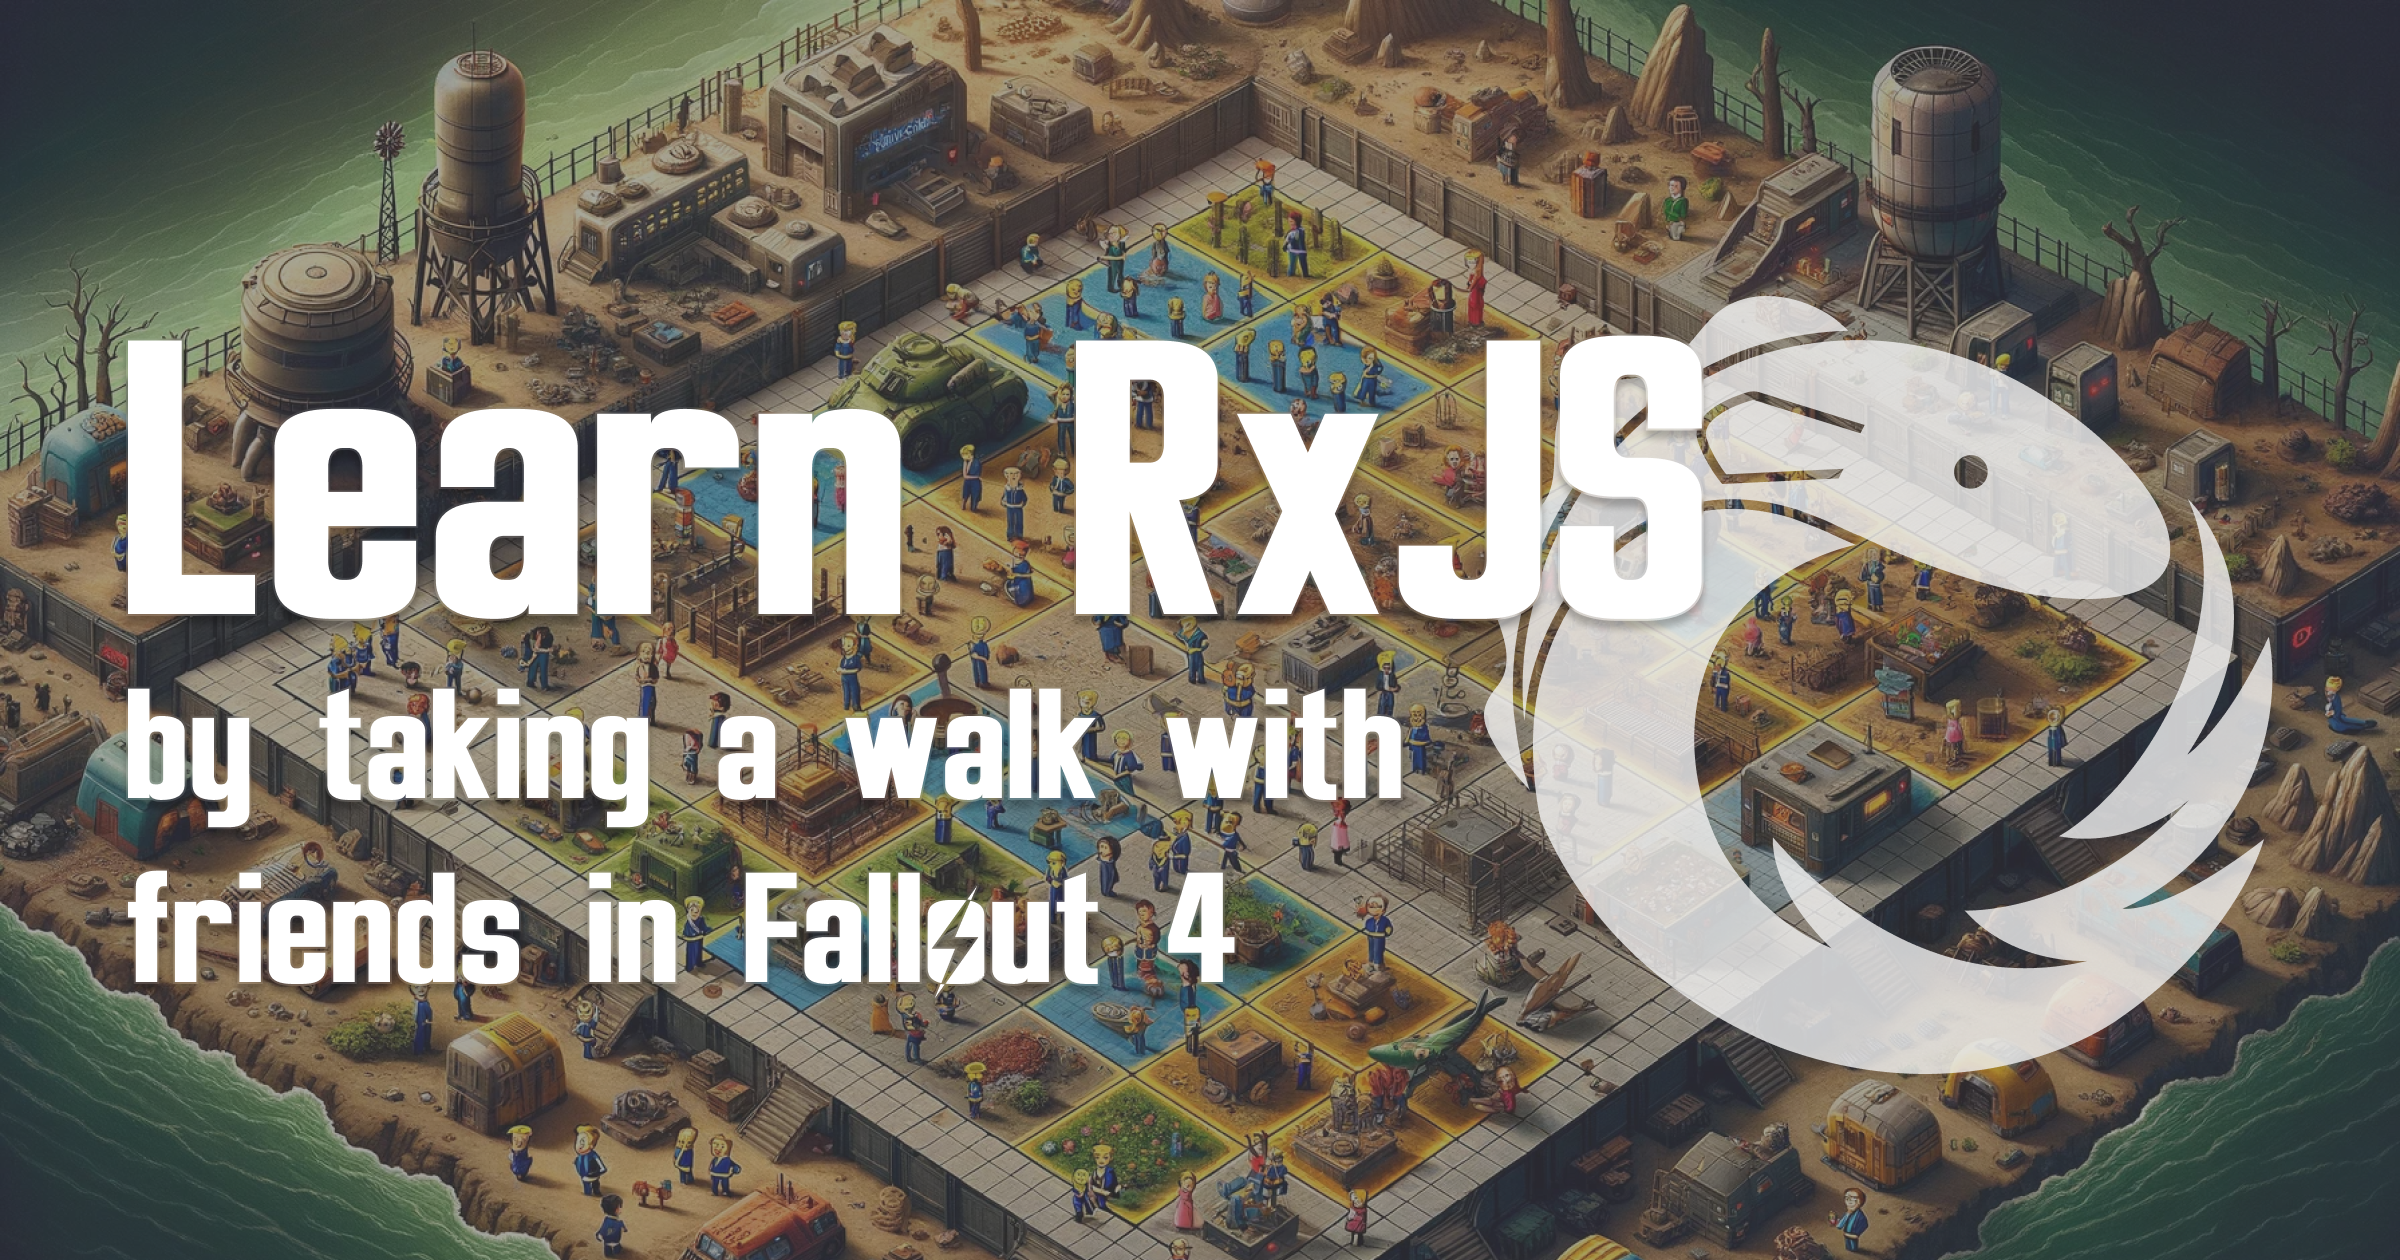 Cover Image for Let's build a multiplayer Fallout 4 map using RxJS!